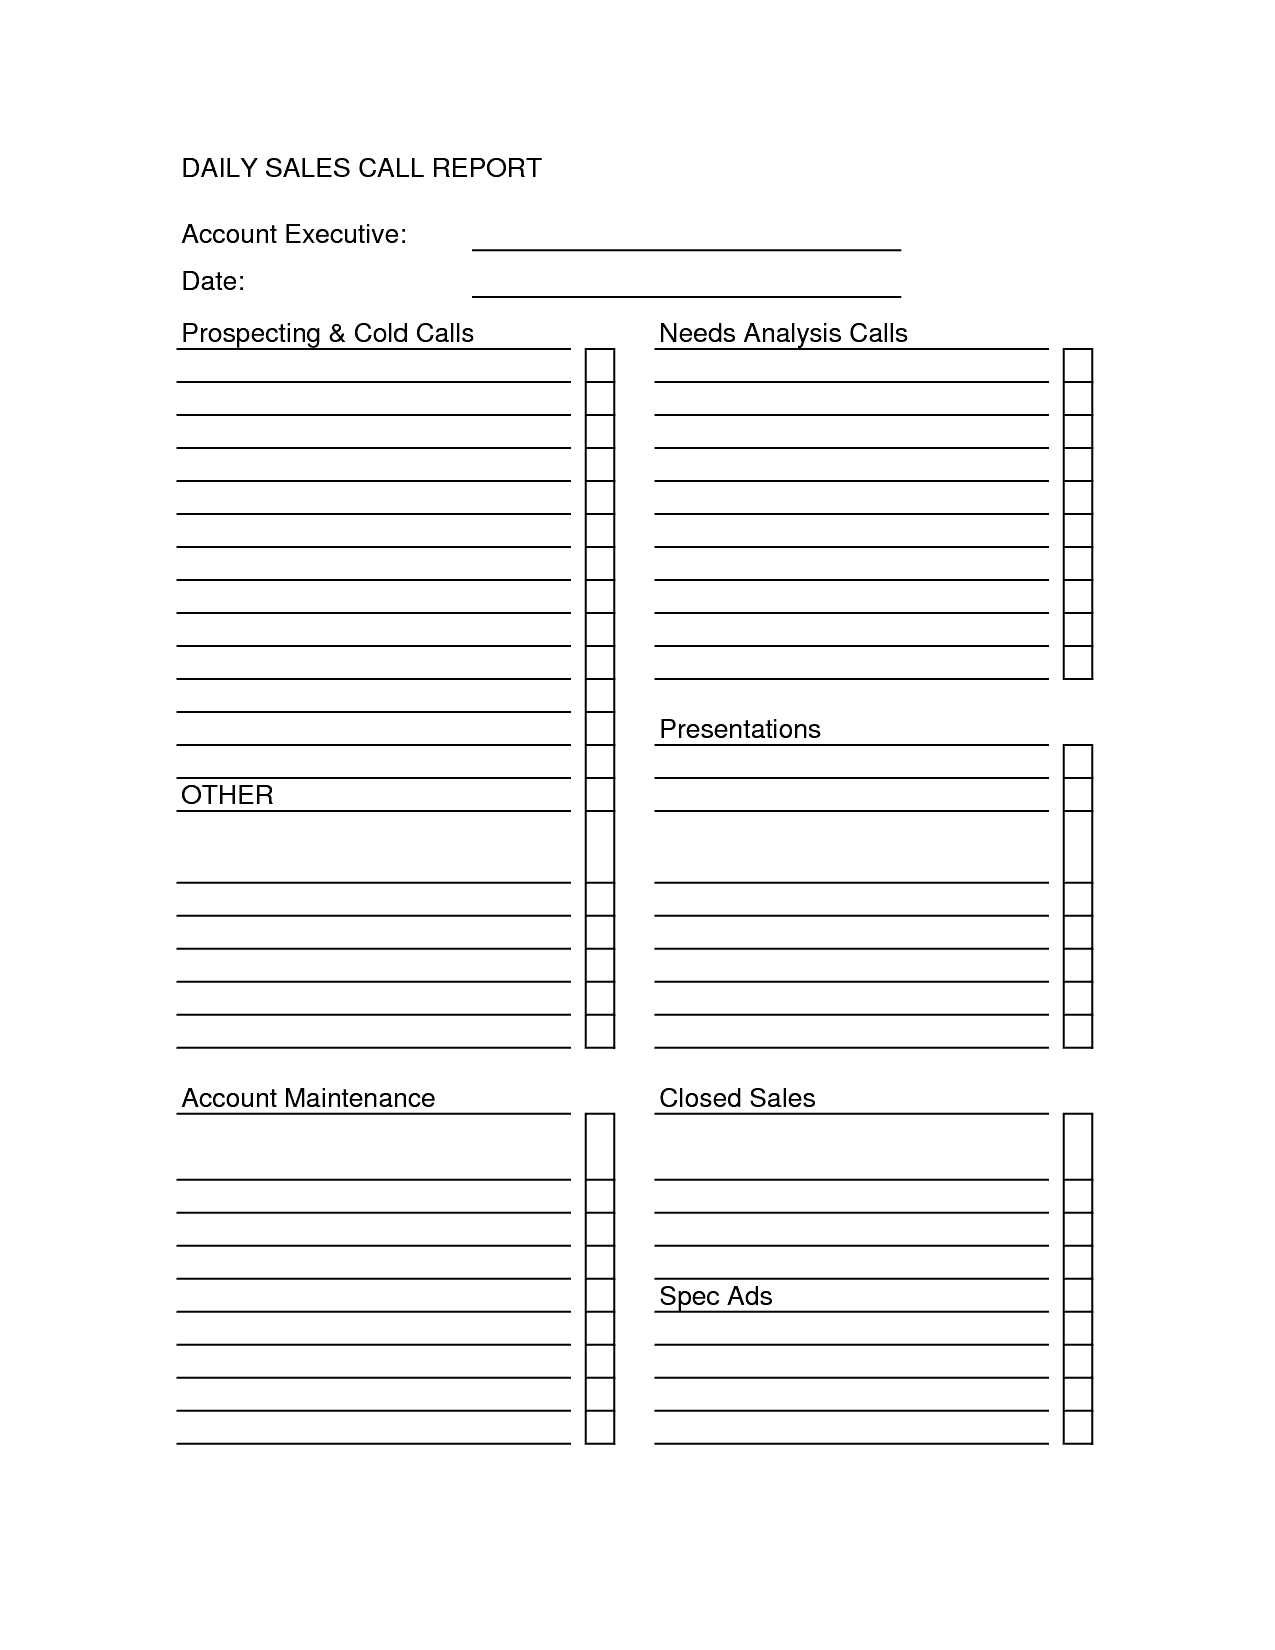 Sales Call Report Templates - Word Excel Fomats In Sales Call Reports Templates Free